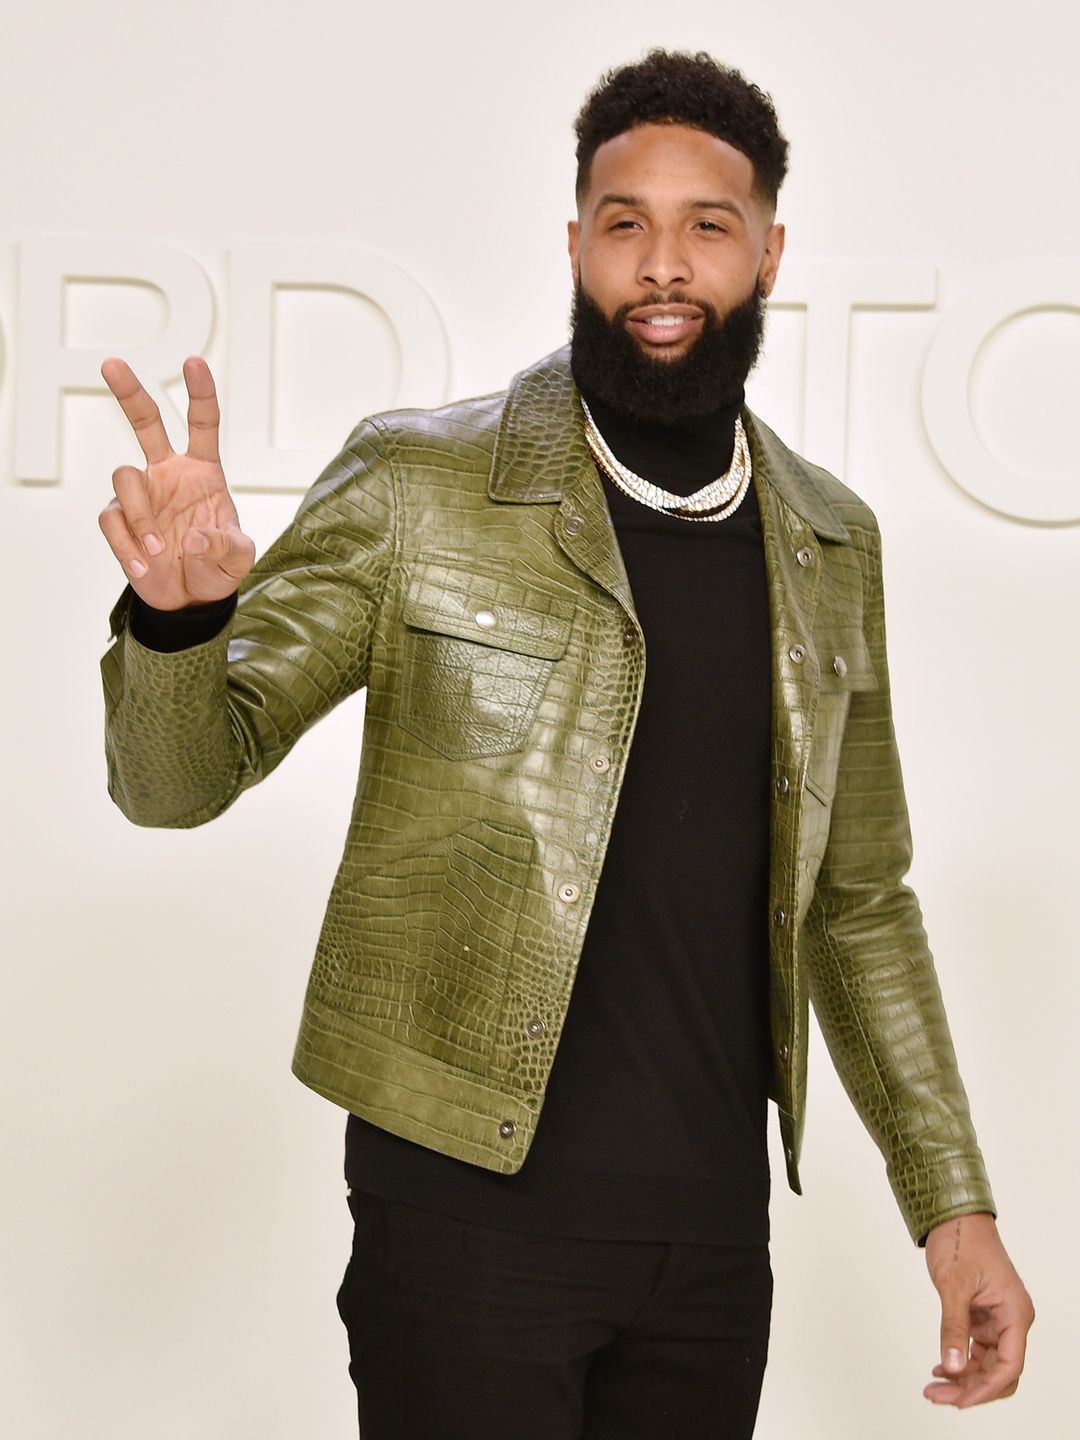 Odell Beckham Jr. attends the Tom Ford AW/20 Fashion Show wearinga black turtle neck and green crocodile skin jacket